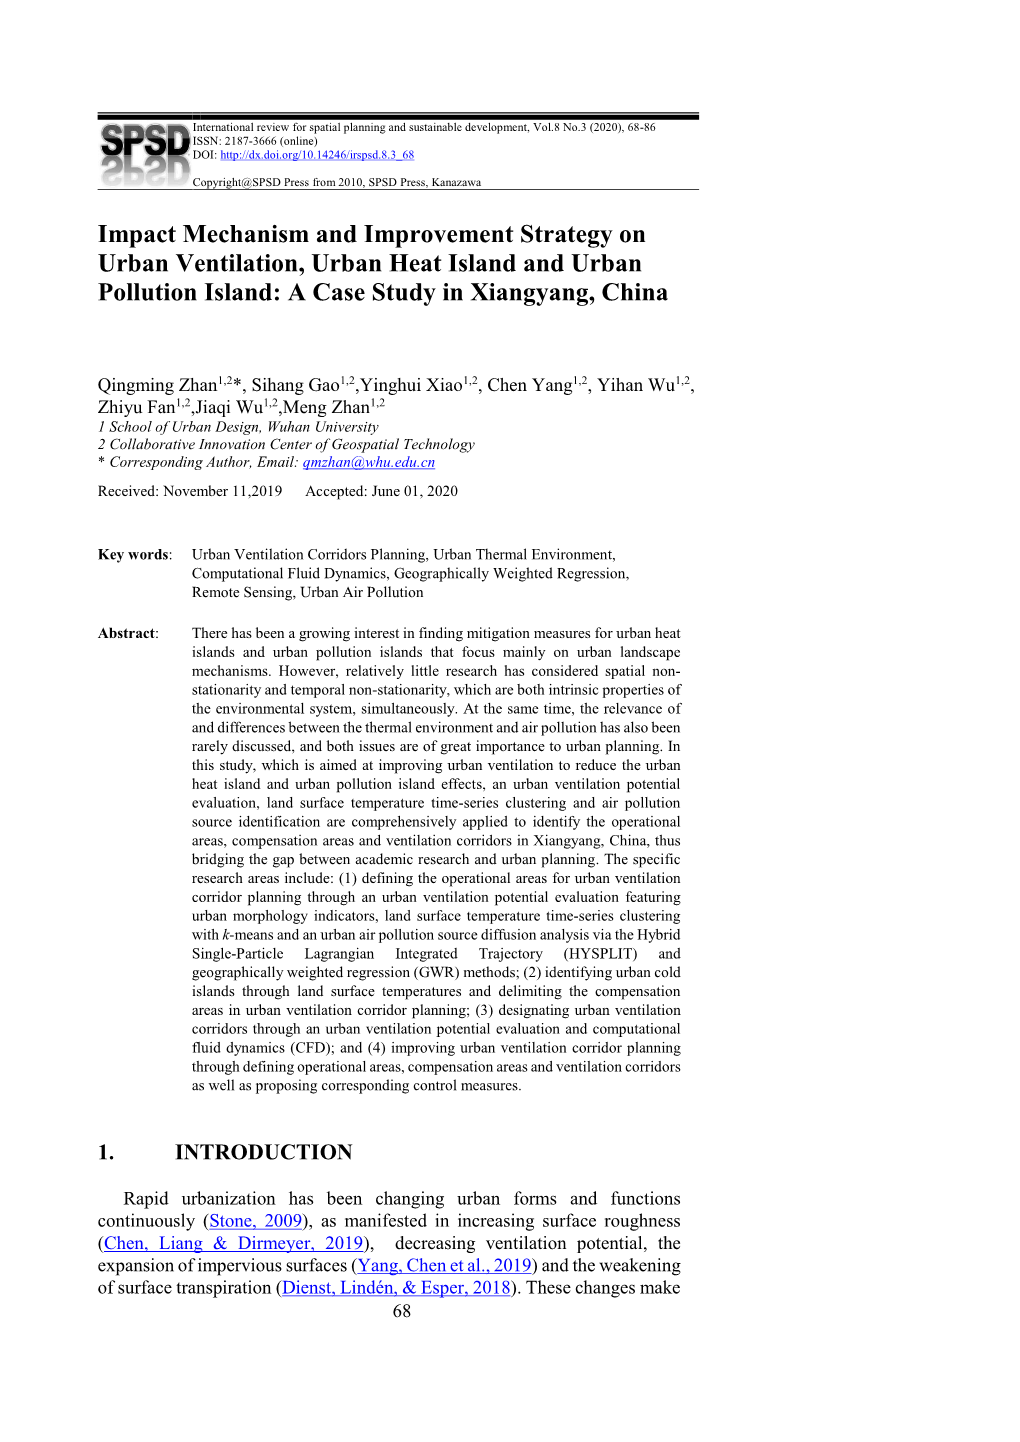 Impact Mechanism and Improvement Strategy on Urban Ventilation, Urban Heat Island and Urban Pollution Island: a Case Study in Xiangyang, China